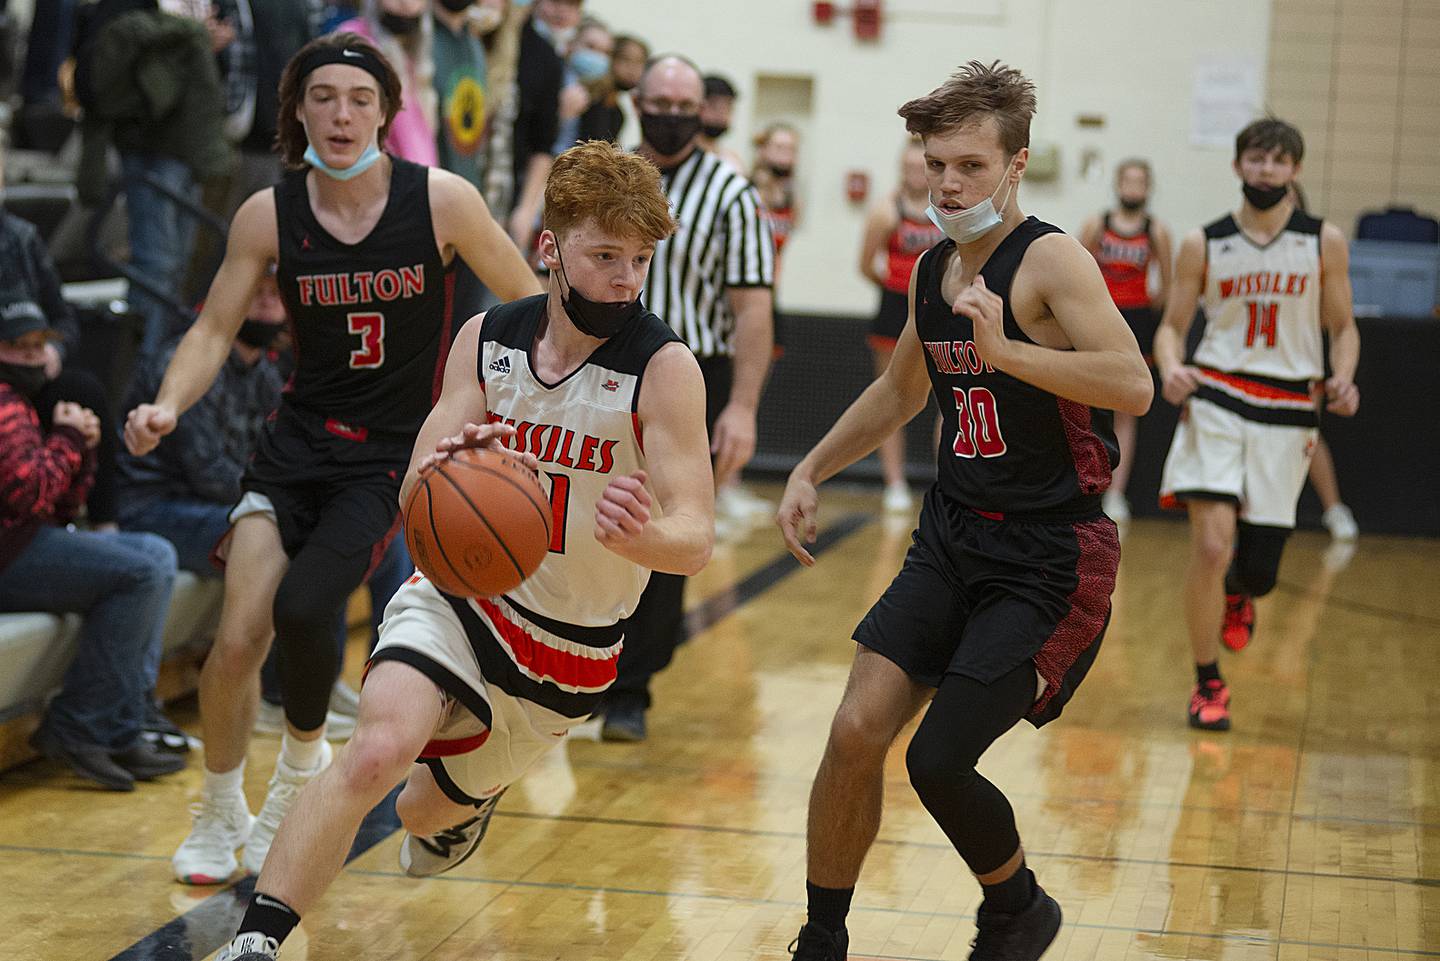 Milledgeville's Connor Nye handles the ball against Fulton on Monday, Jan. 17, 2022.